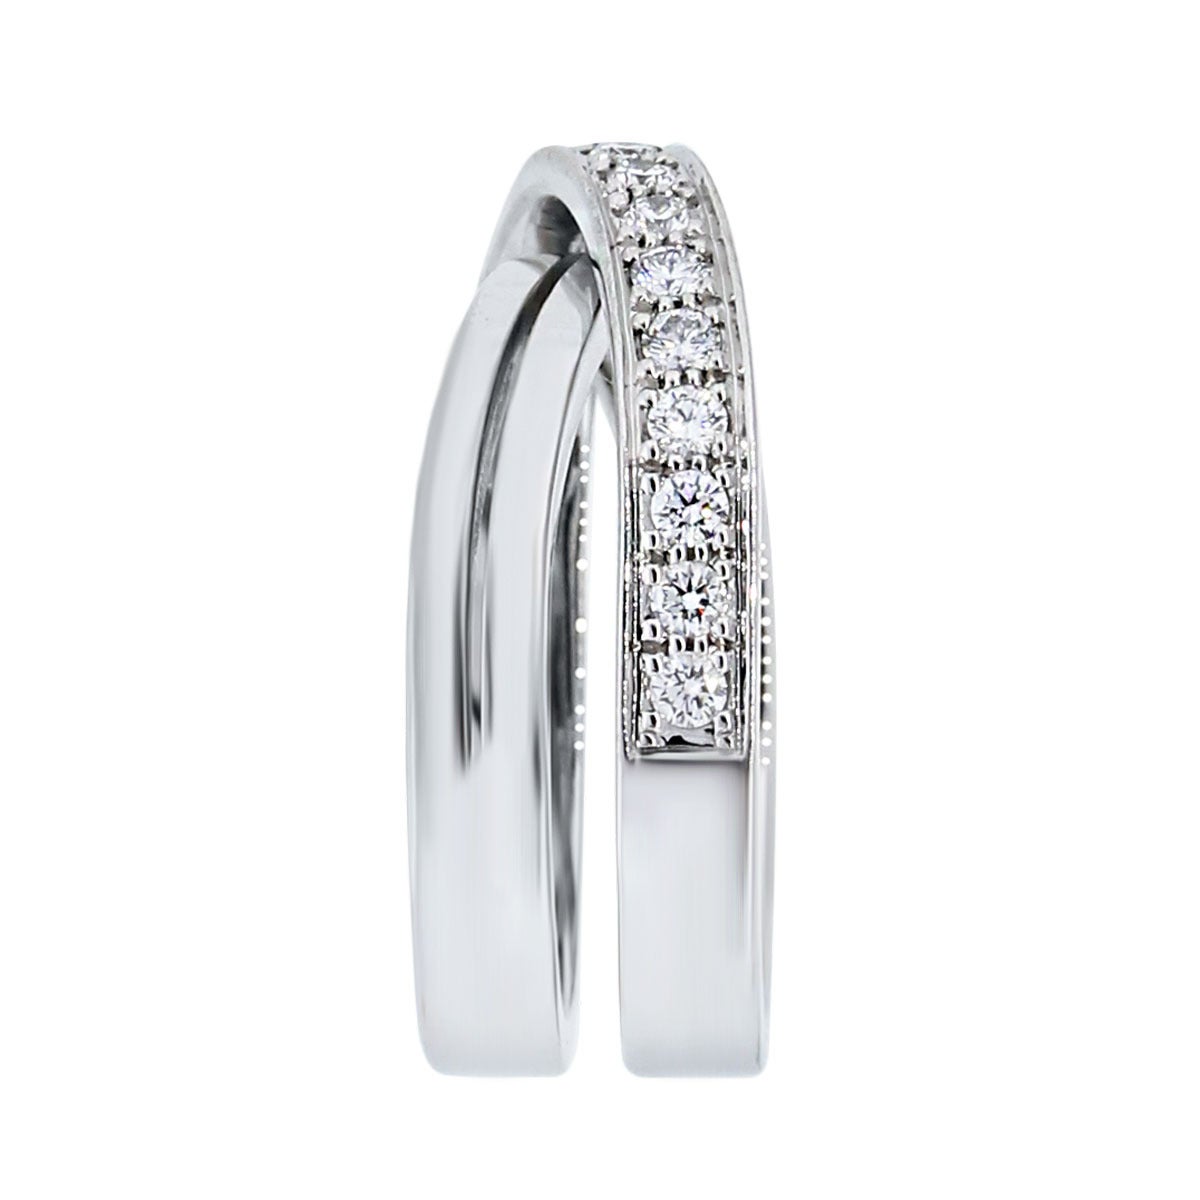 Brand: Cartier
Style: Paris Nouvelle Vague Size 58 Ring
Material: 18k White Gold
Diamond Details: Semi paved round brilliant diamonds F/G in color and VS in clarity
Ring Measurements: 0.87